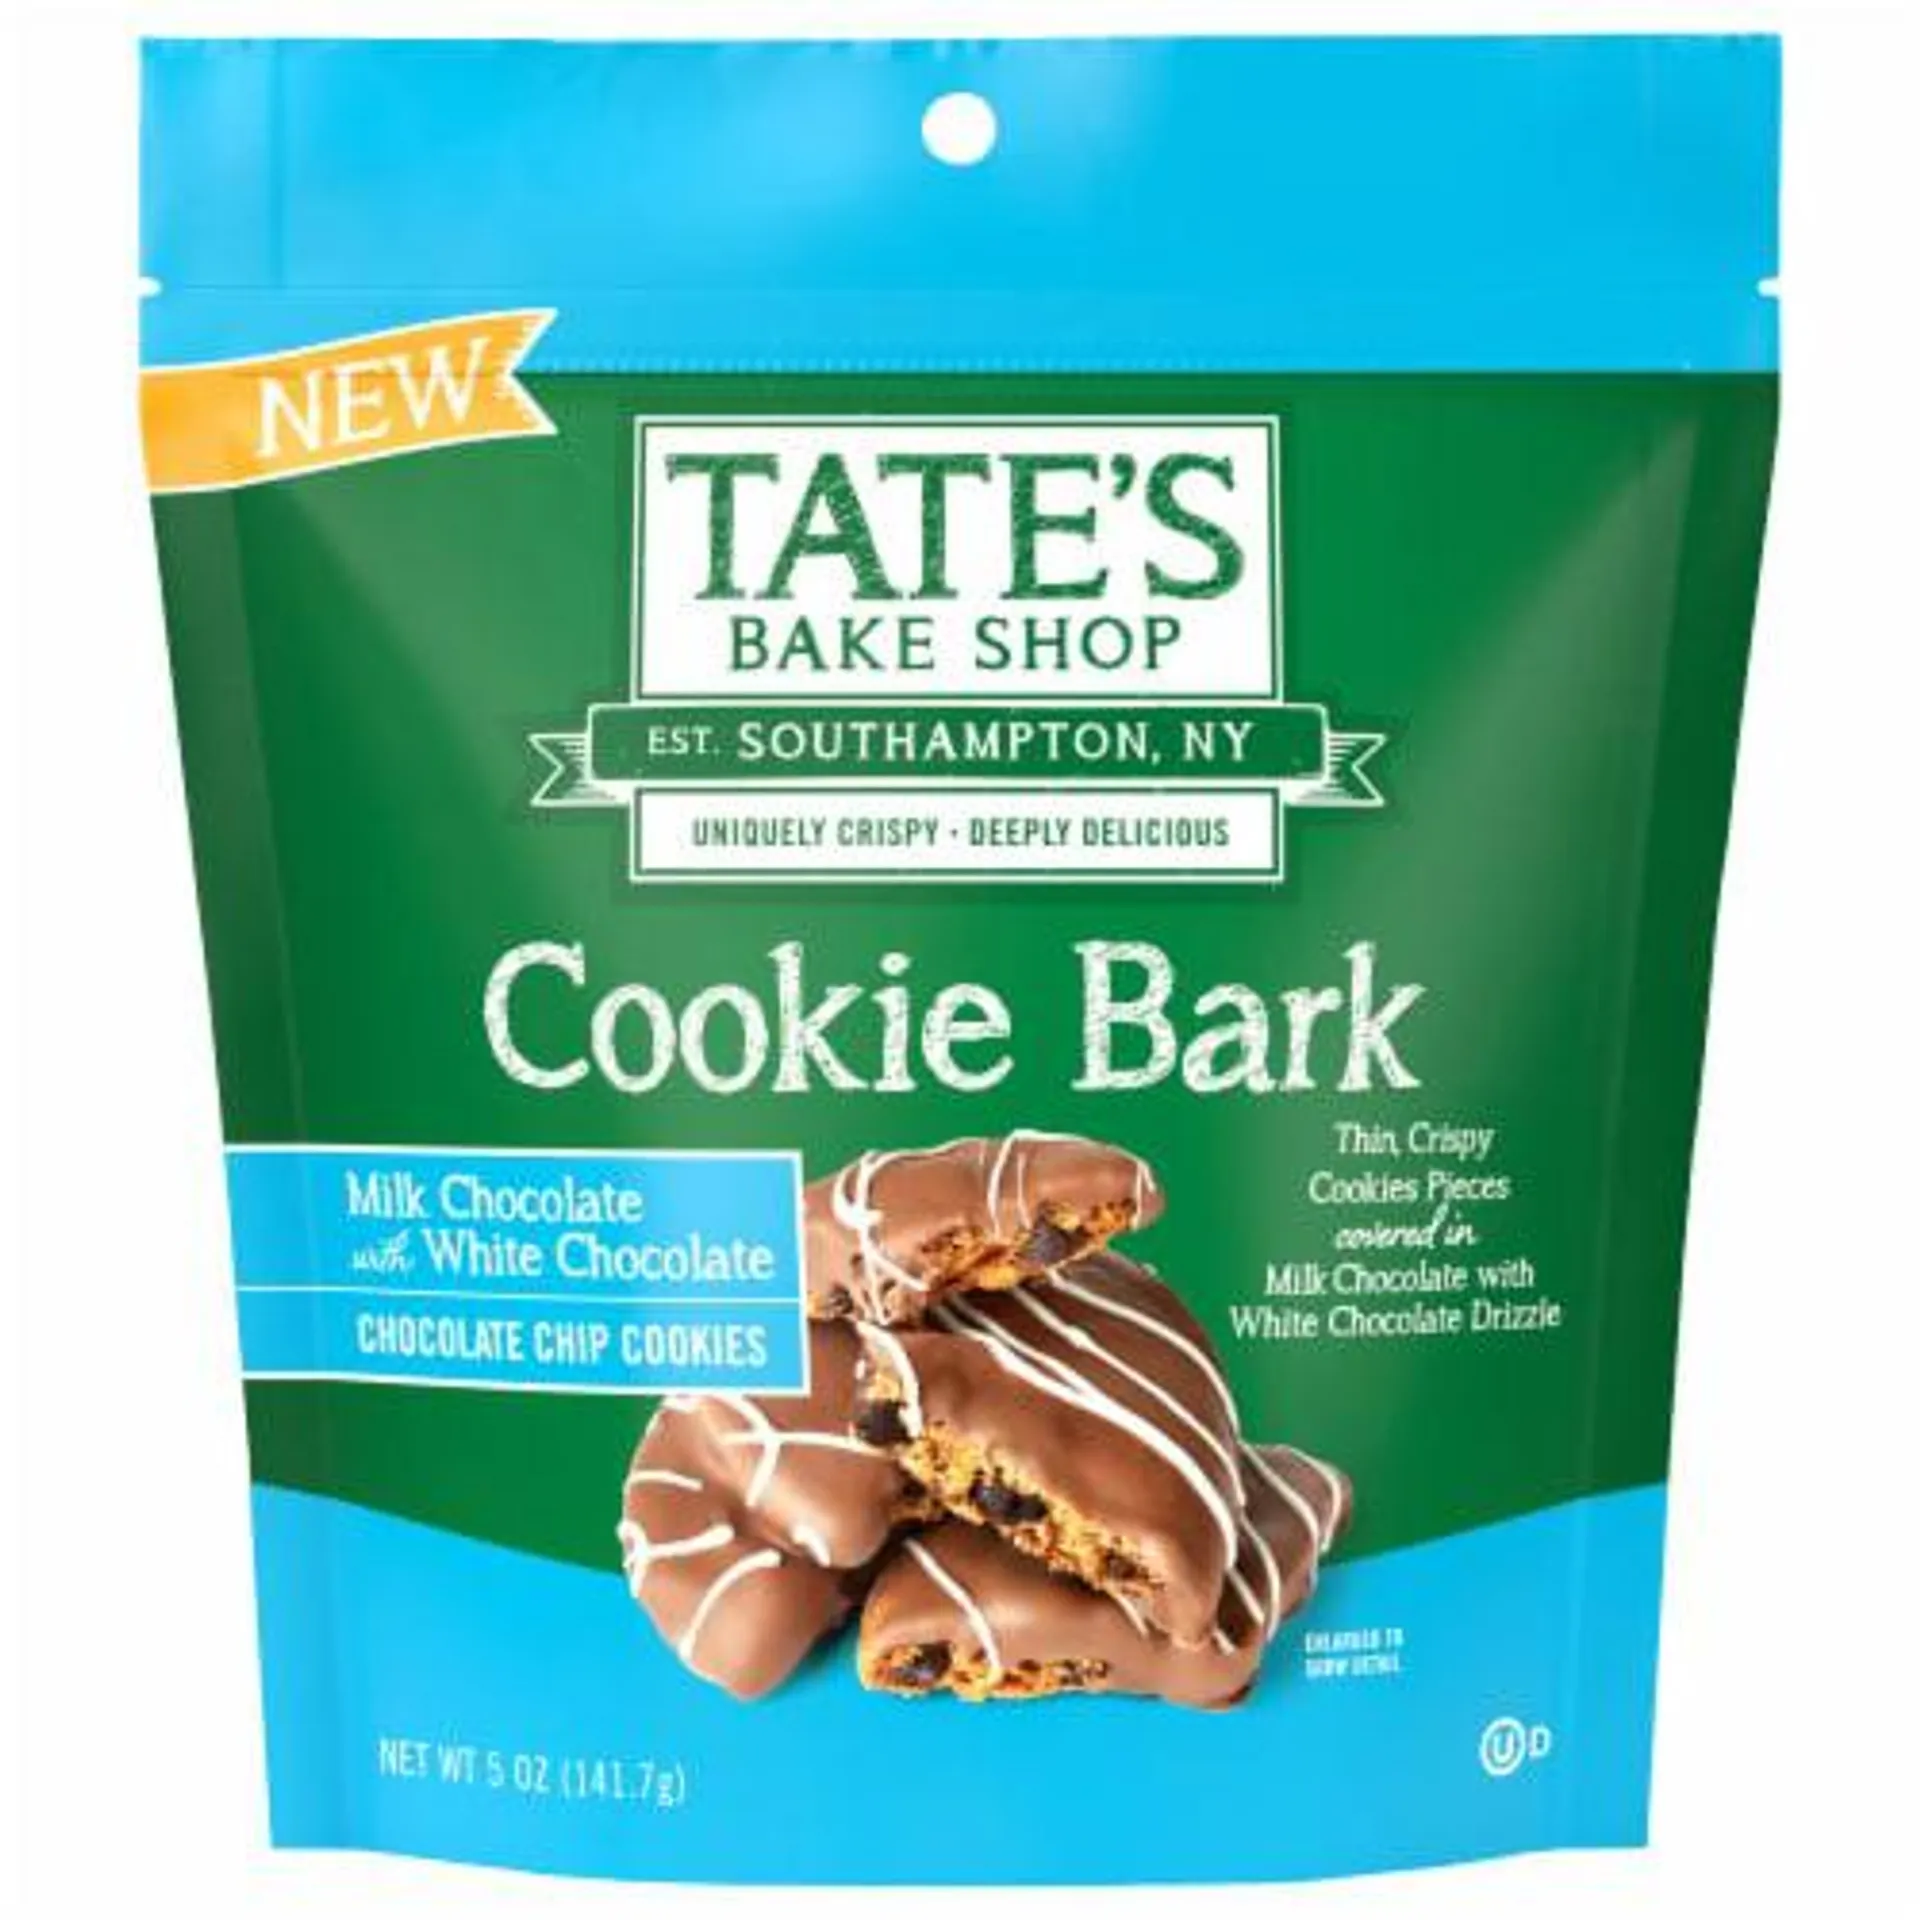 Tate's Bake Shop White Chocolate Drizzle Chocolate Chip Cookie Bark